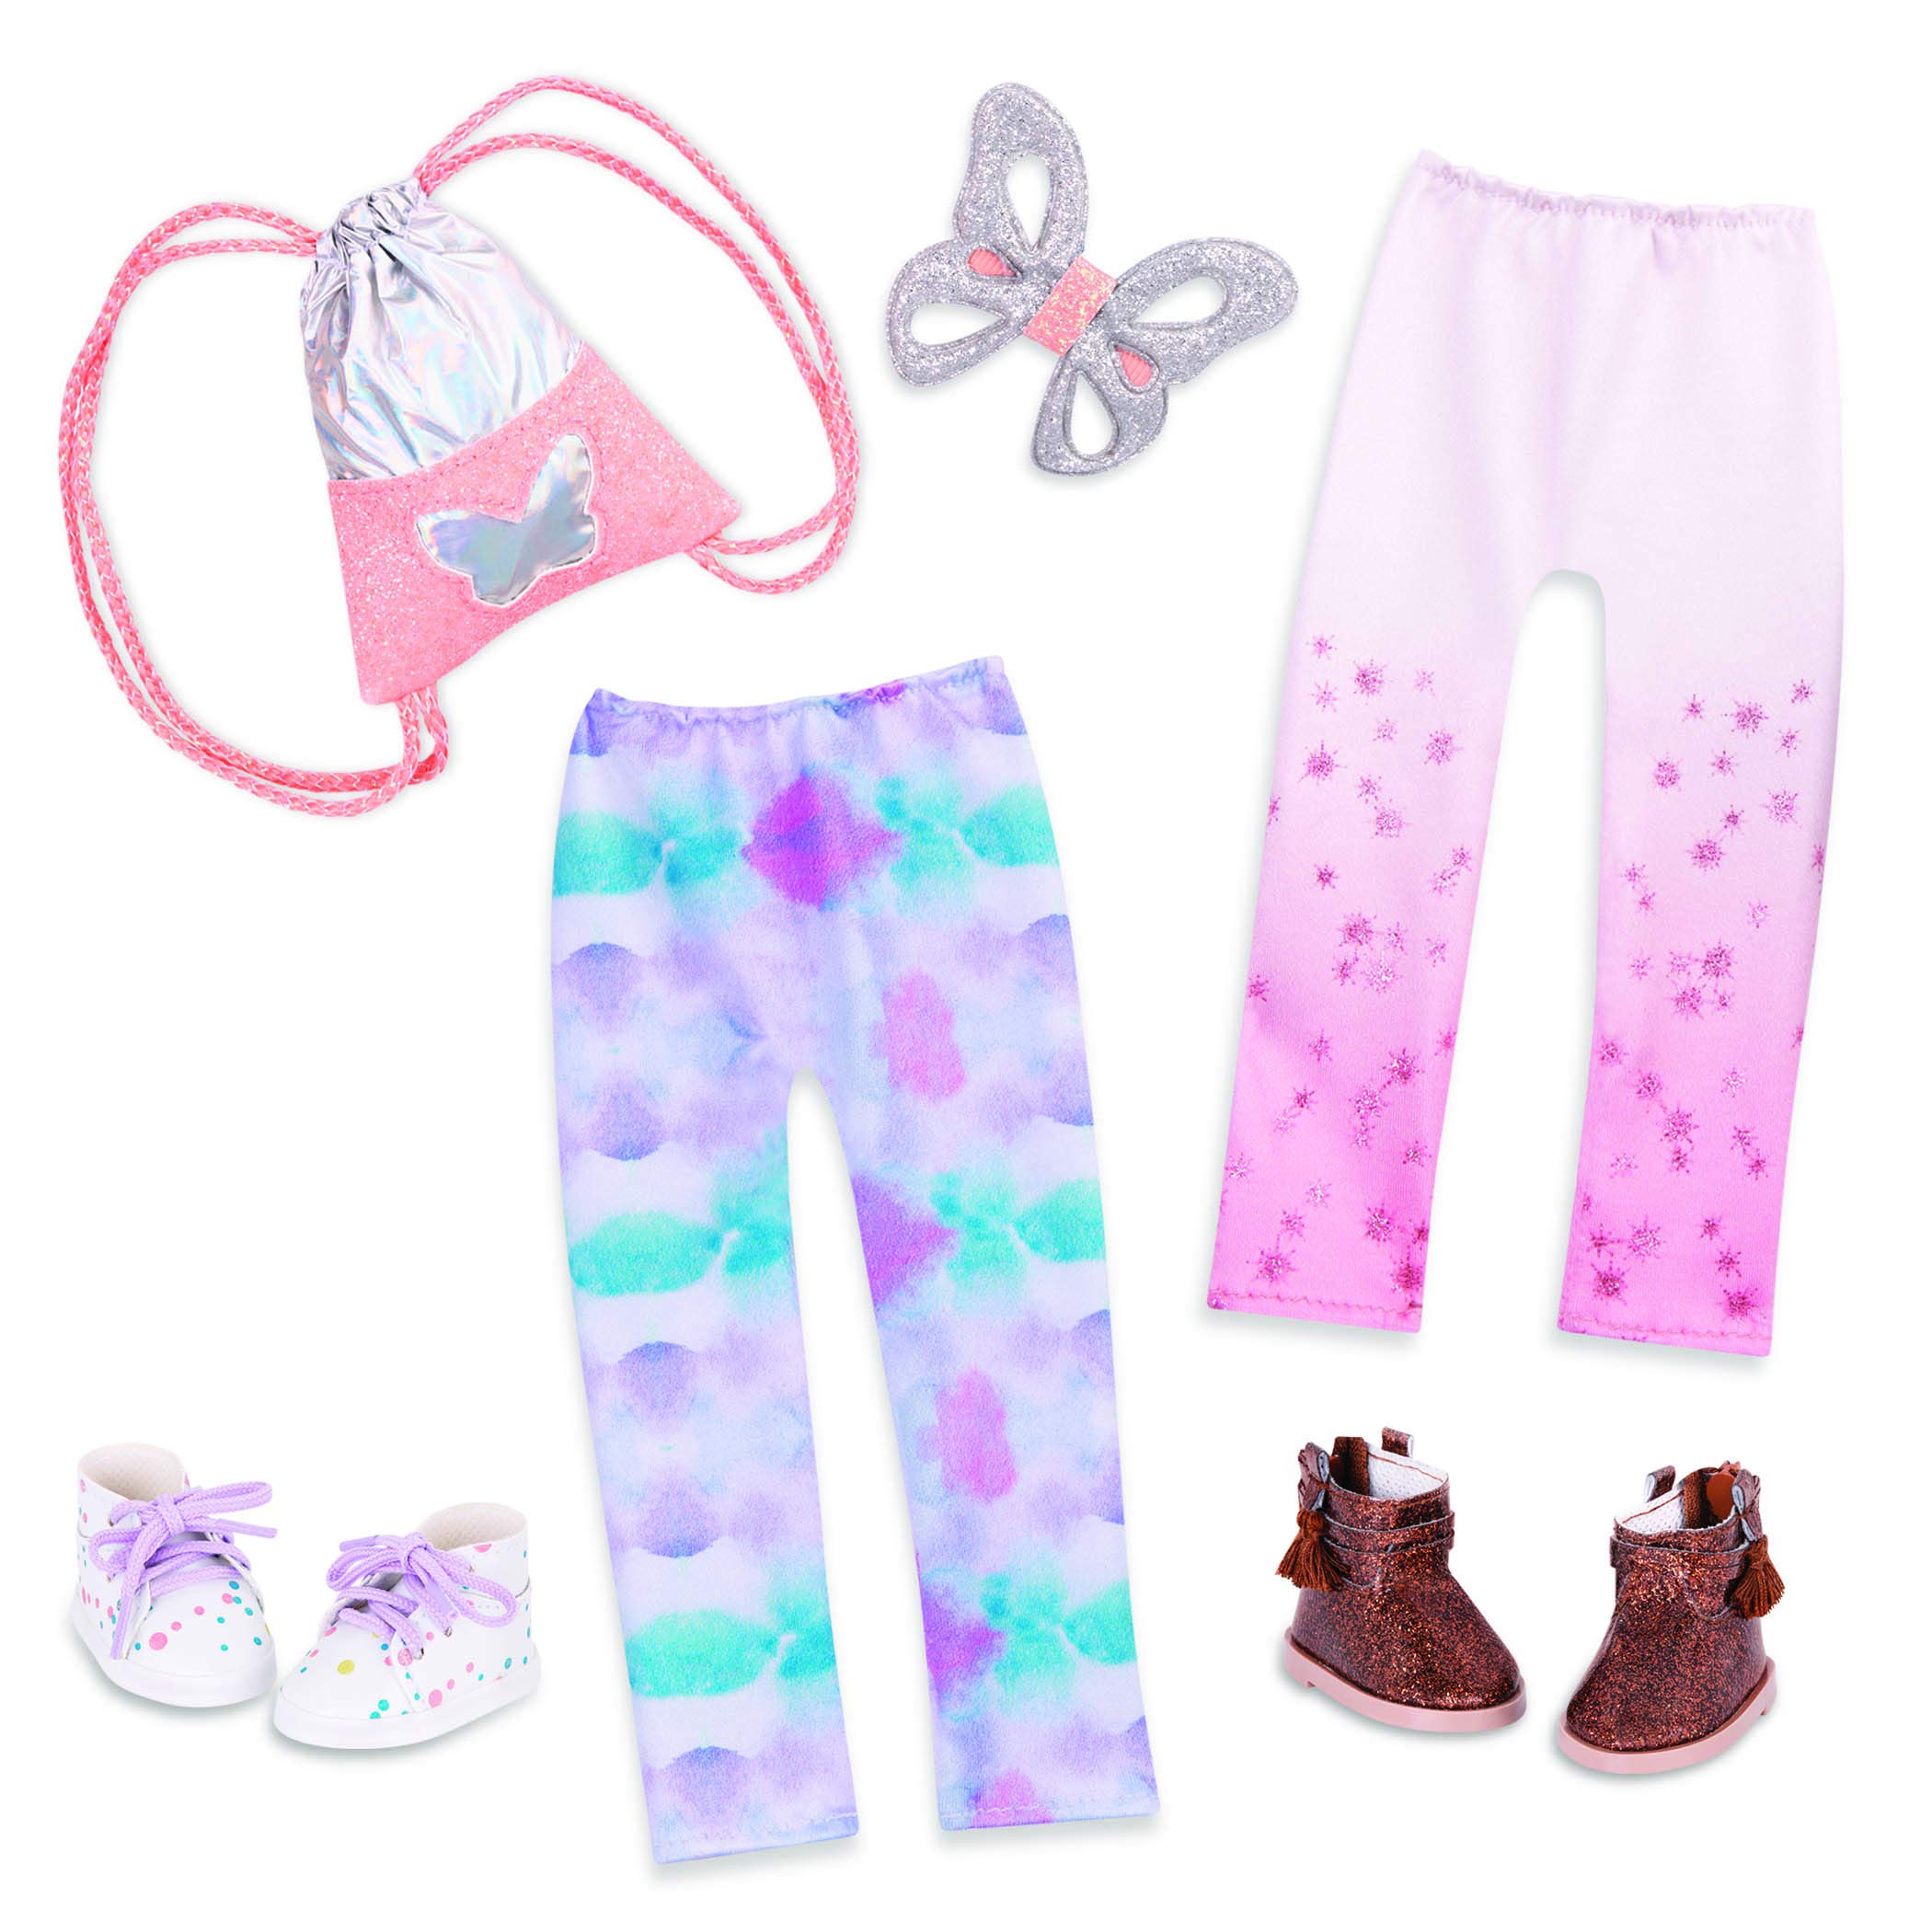 Glitter Girls – 14-inch Doll Clothes and Accessories – 2 Leggings, 2 Shoes, Butterfly Hair Clip, and Knapsack Fashion Pack – Butterflies & Dots – Toys for Kids Ages 3 and Up (Pink & Bl